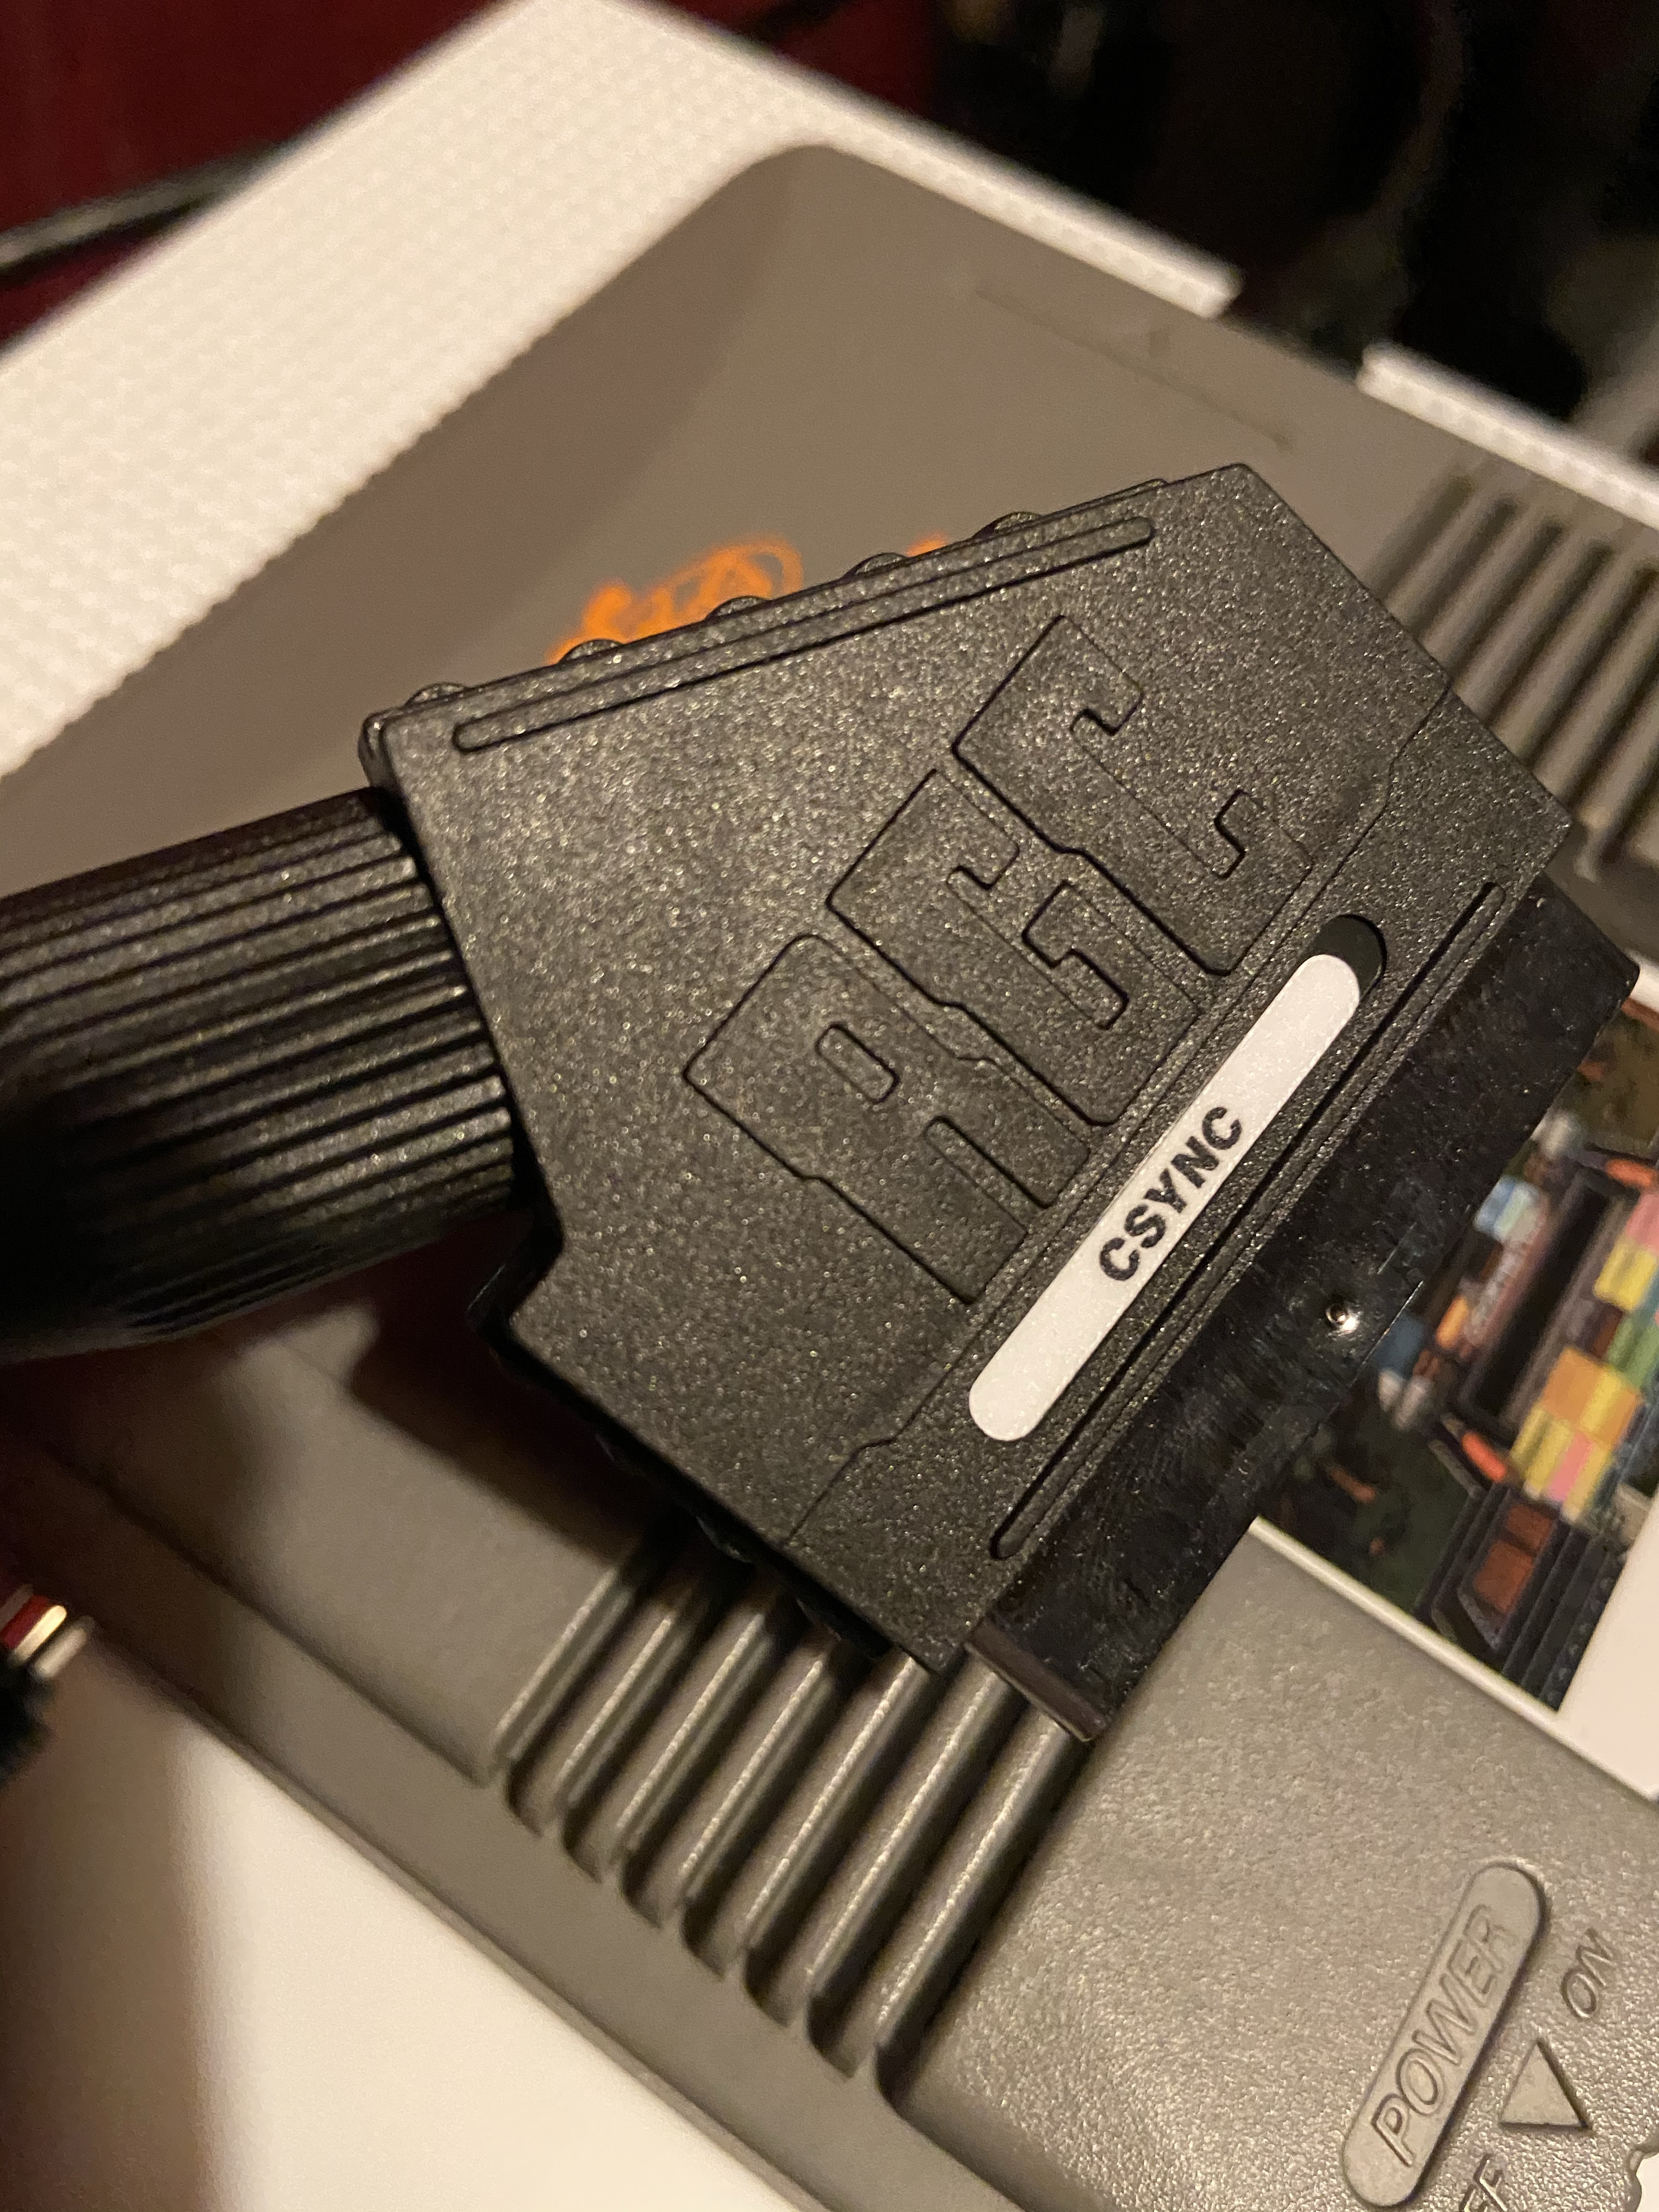 RGB SCART cable for RGB-modded PC Engine